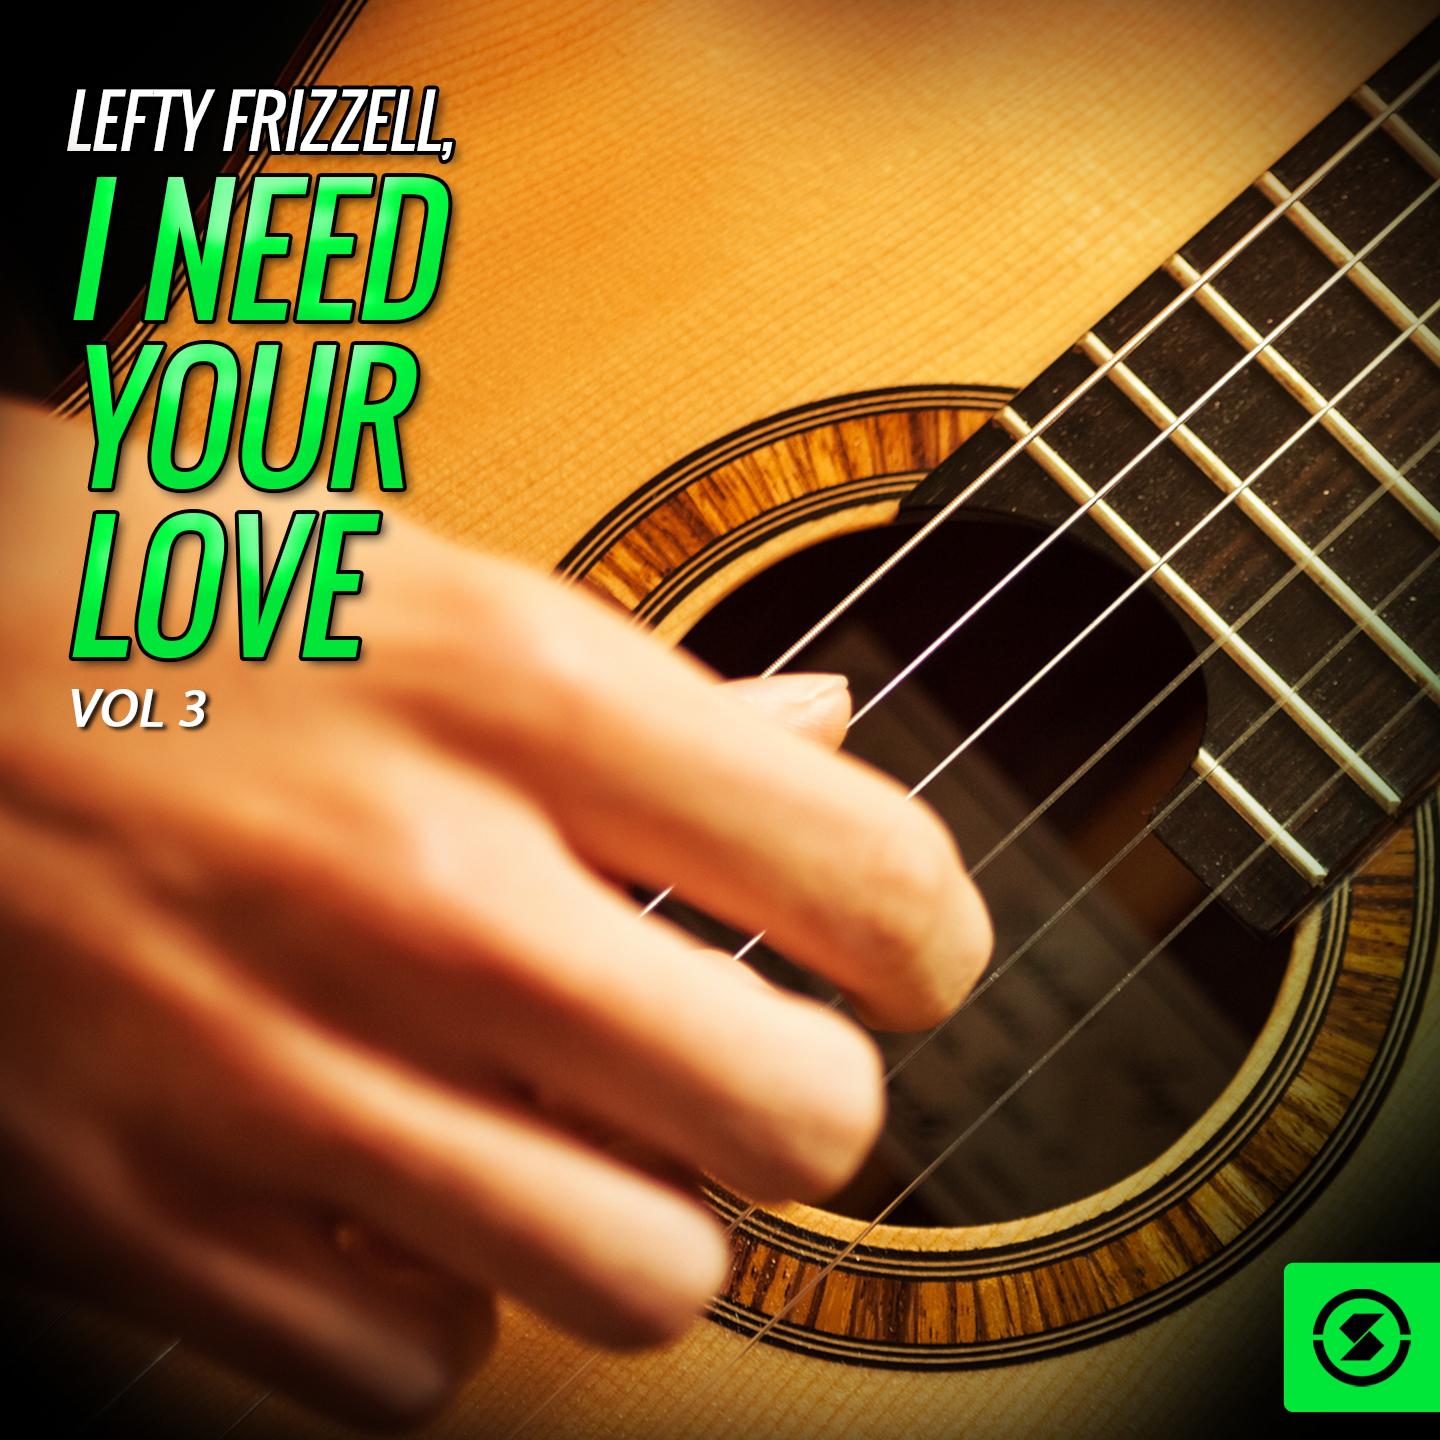 Lefty Frizzell, I Need Your Love, Vol. 3